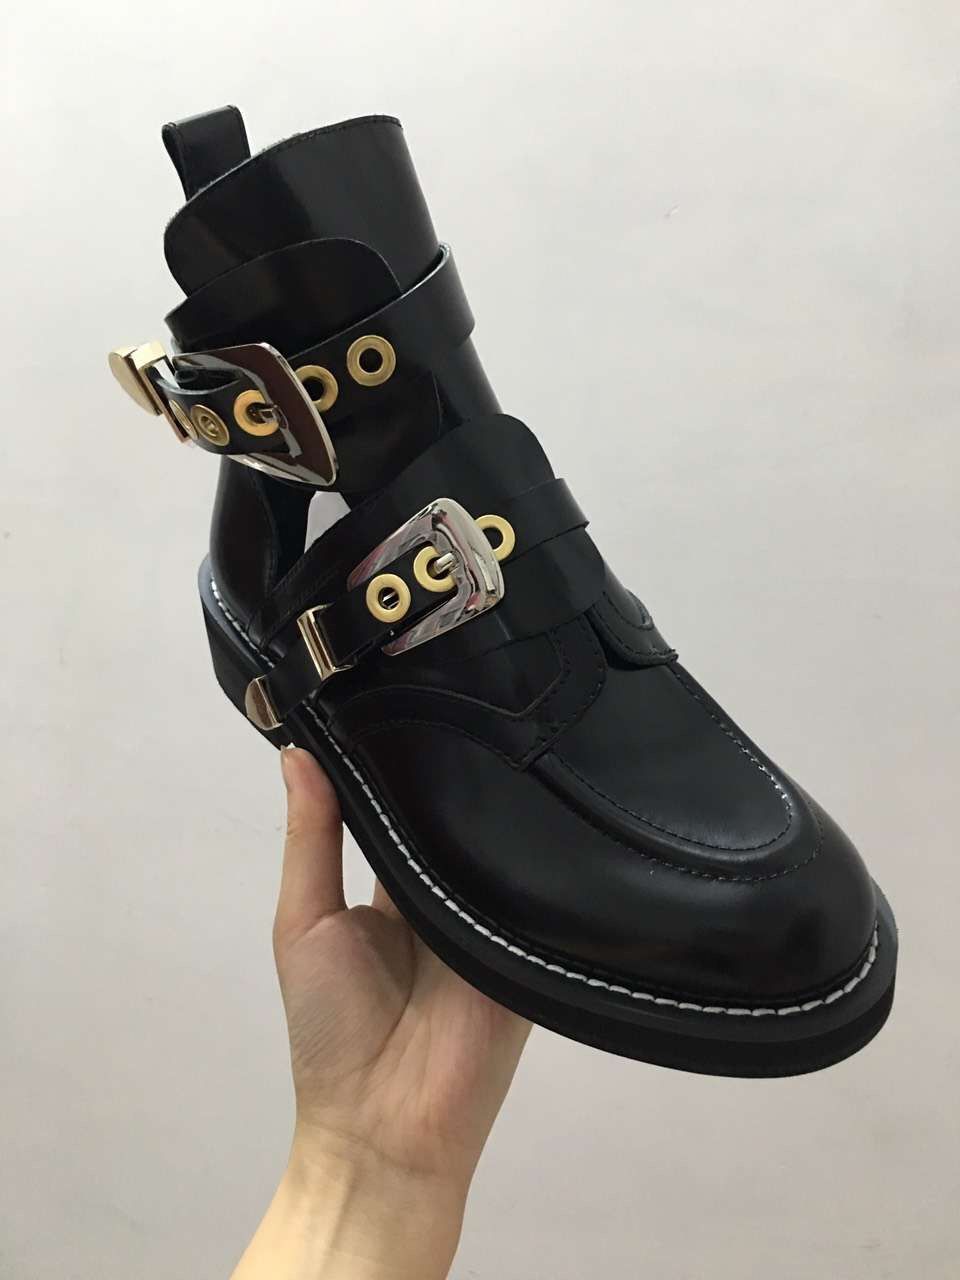 2016 Winter Fall Ranger Boots Women Cut Out Biker Boots Buckle Black Leather Ladies Real Leather ...